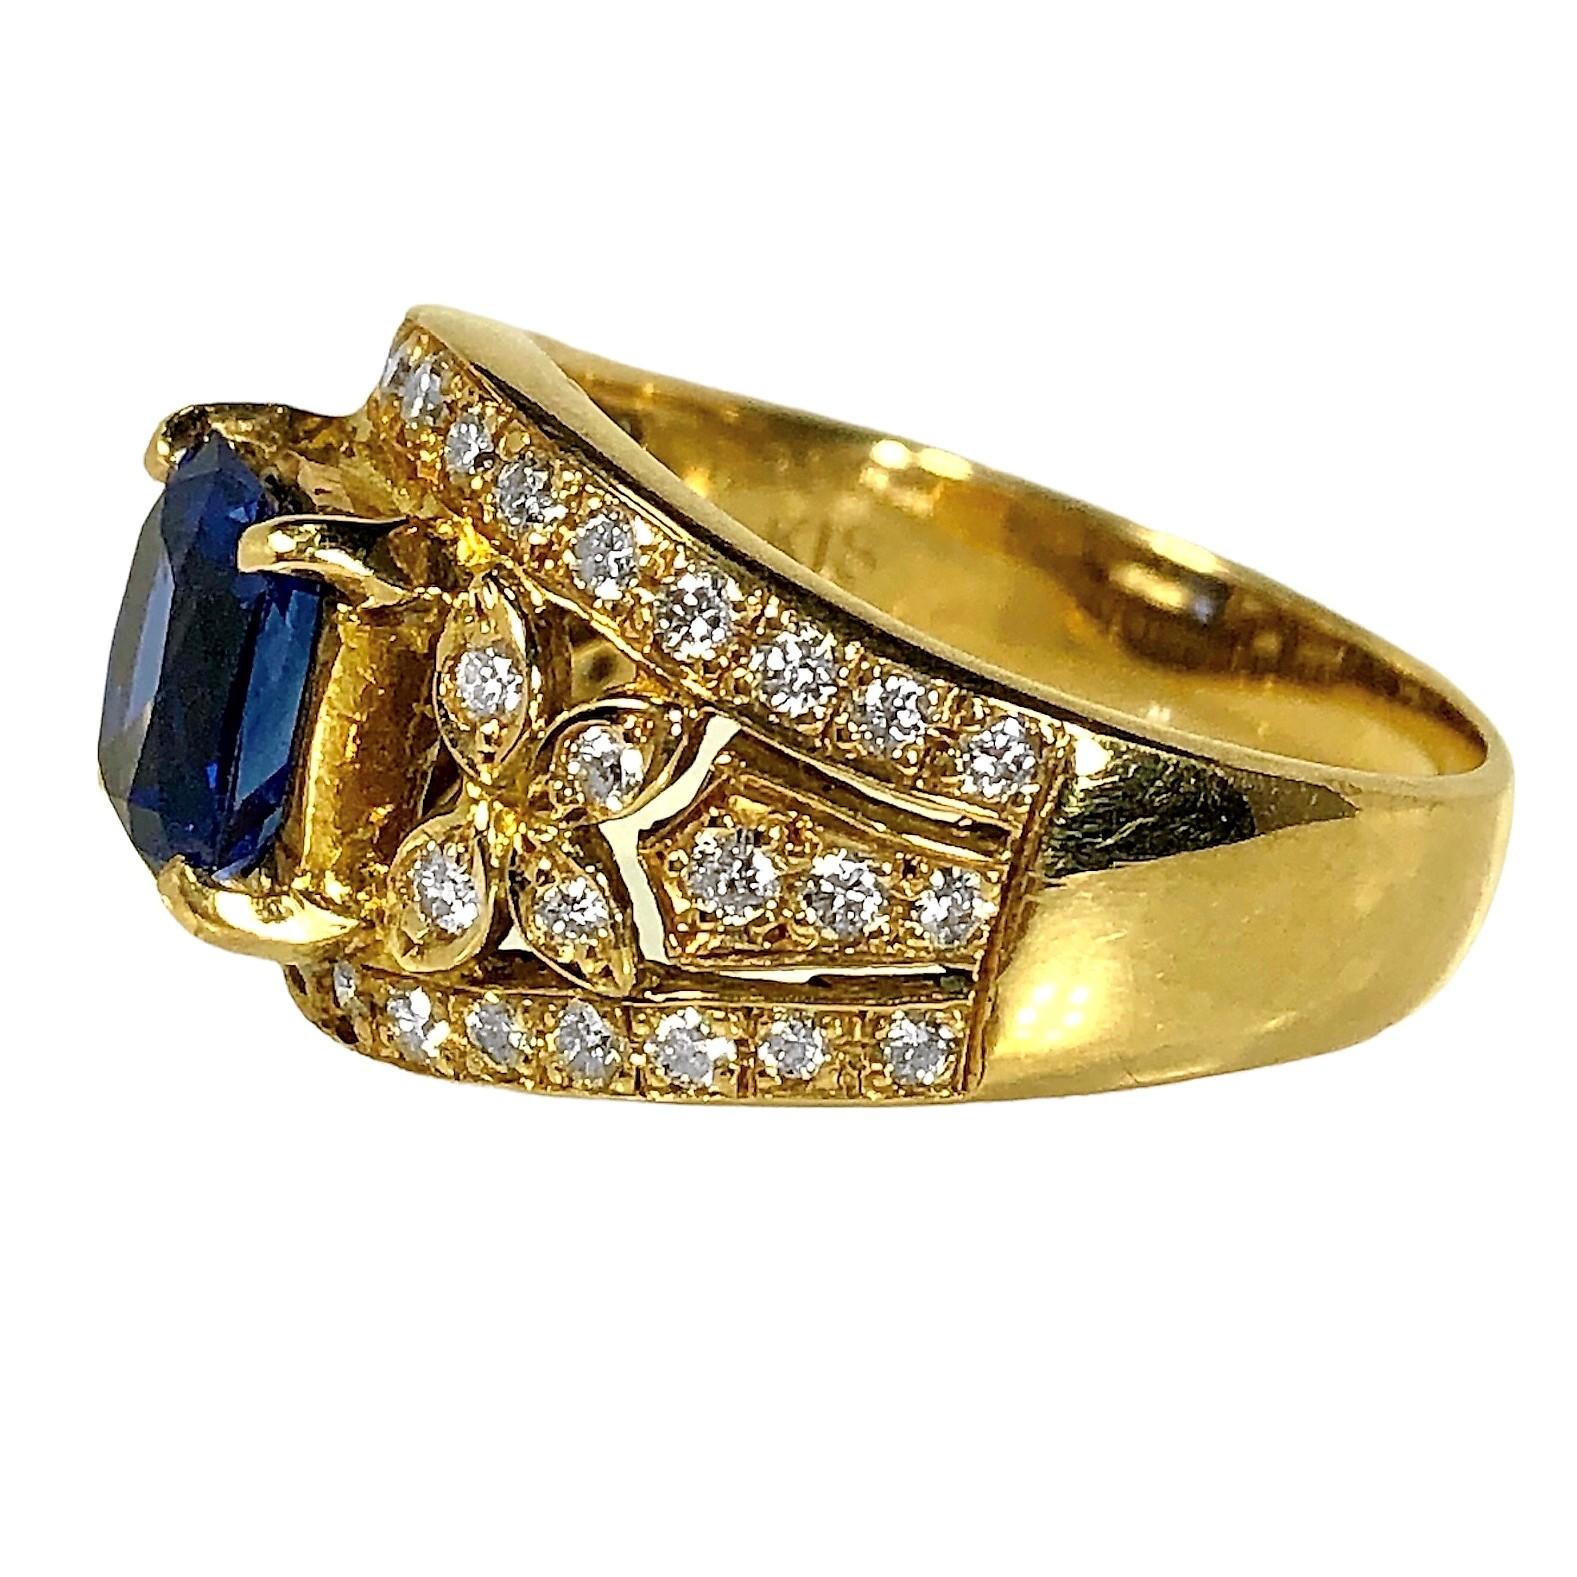 Brilliant Cut 18K Yellow Gold, Diamond and Sapphire Cocktail Ring For Sale